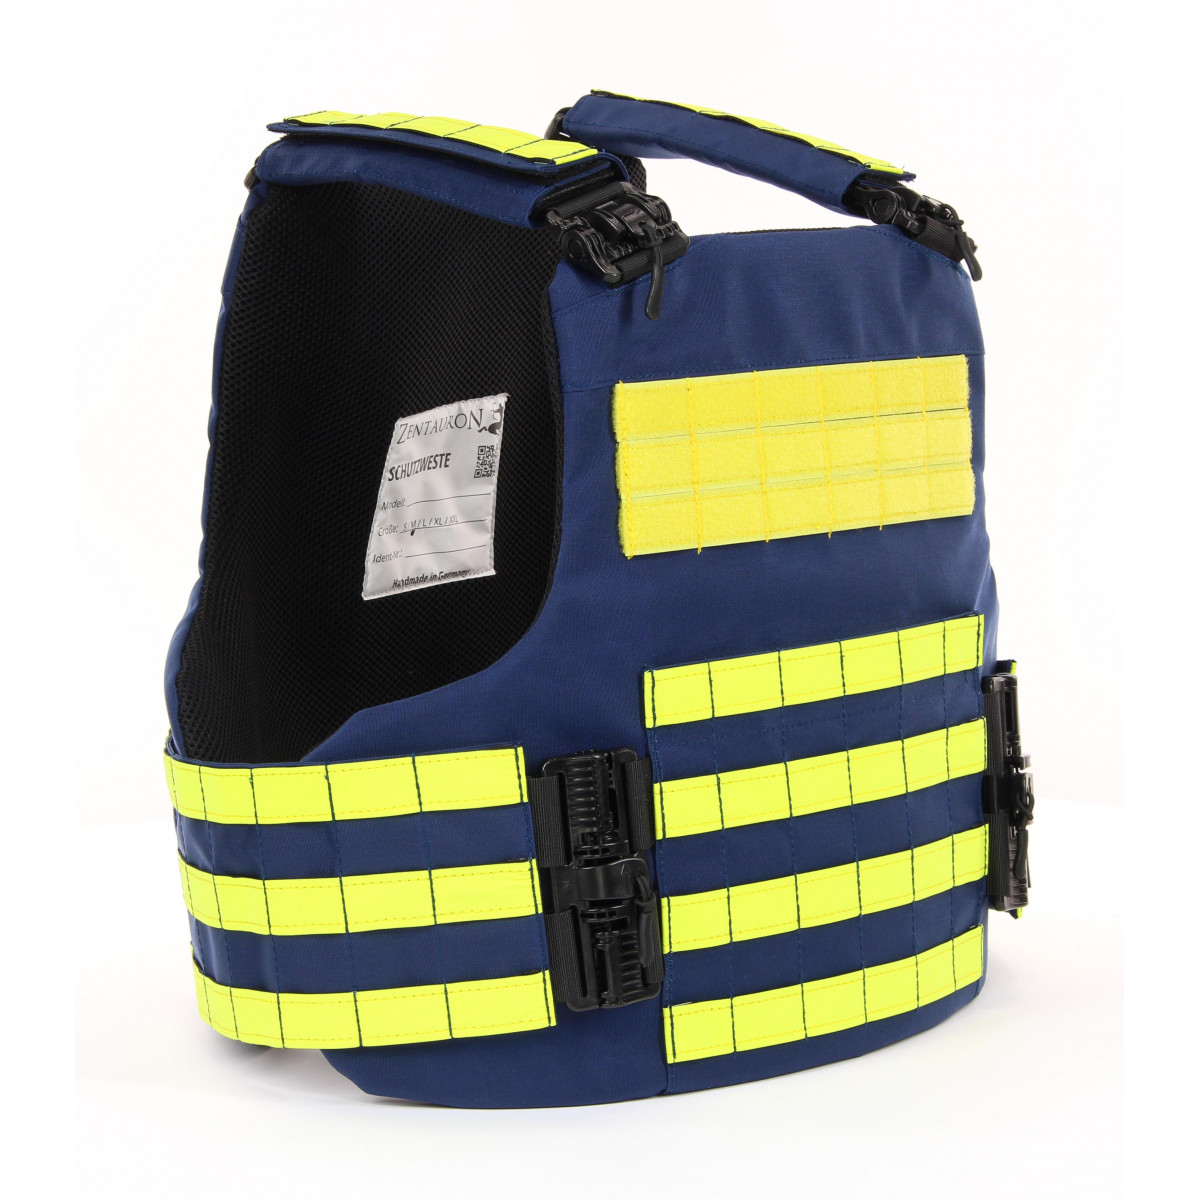 Civilian protective vest hull for rescue and law enforcement.